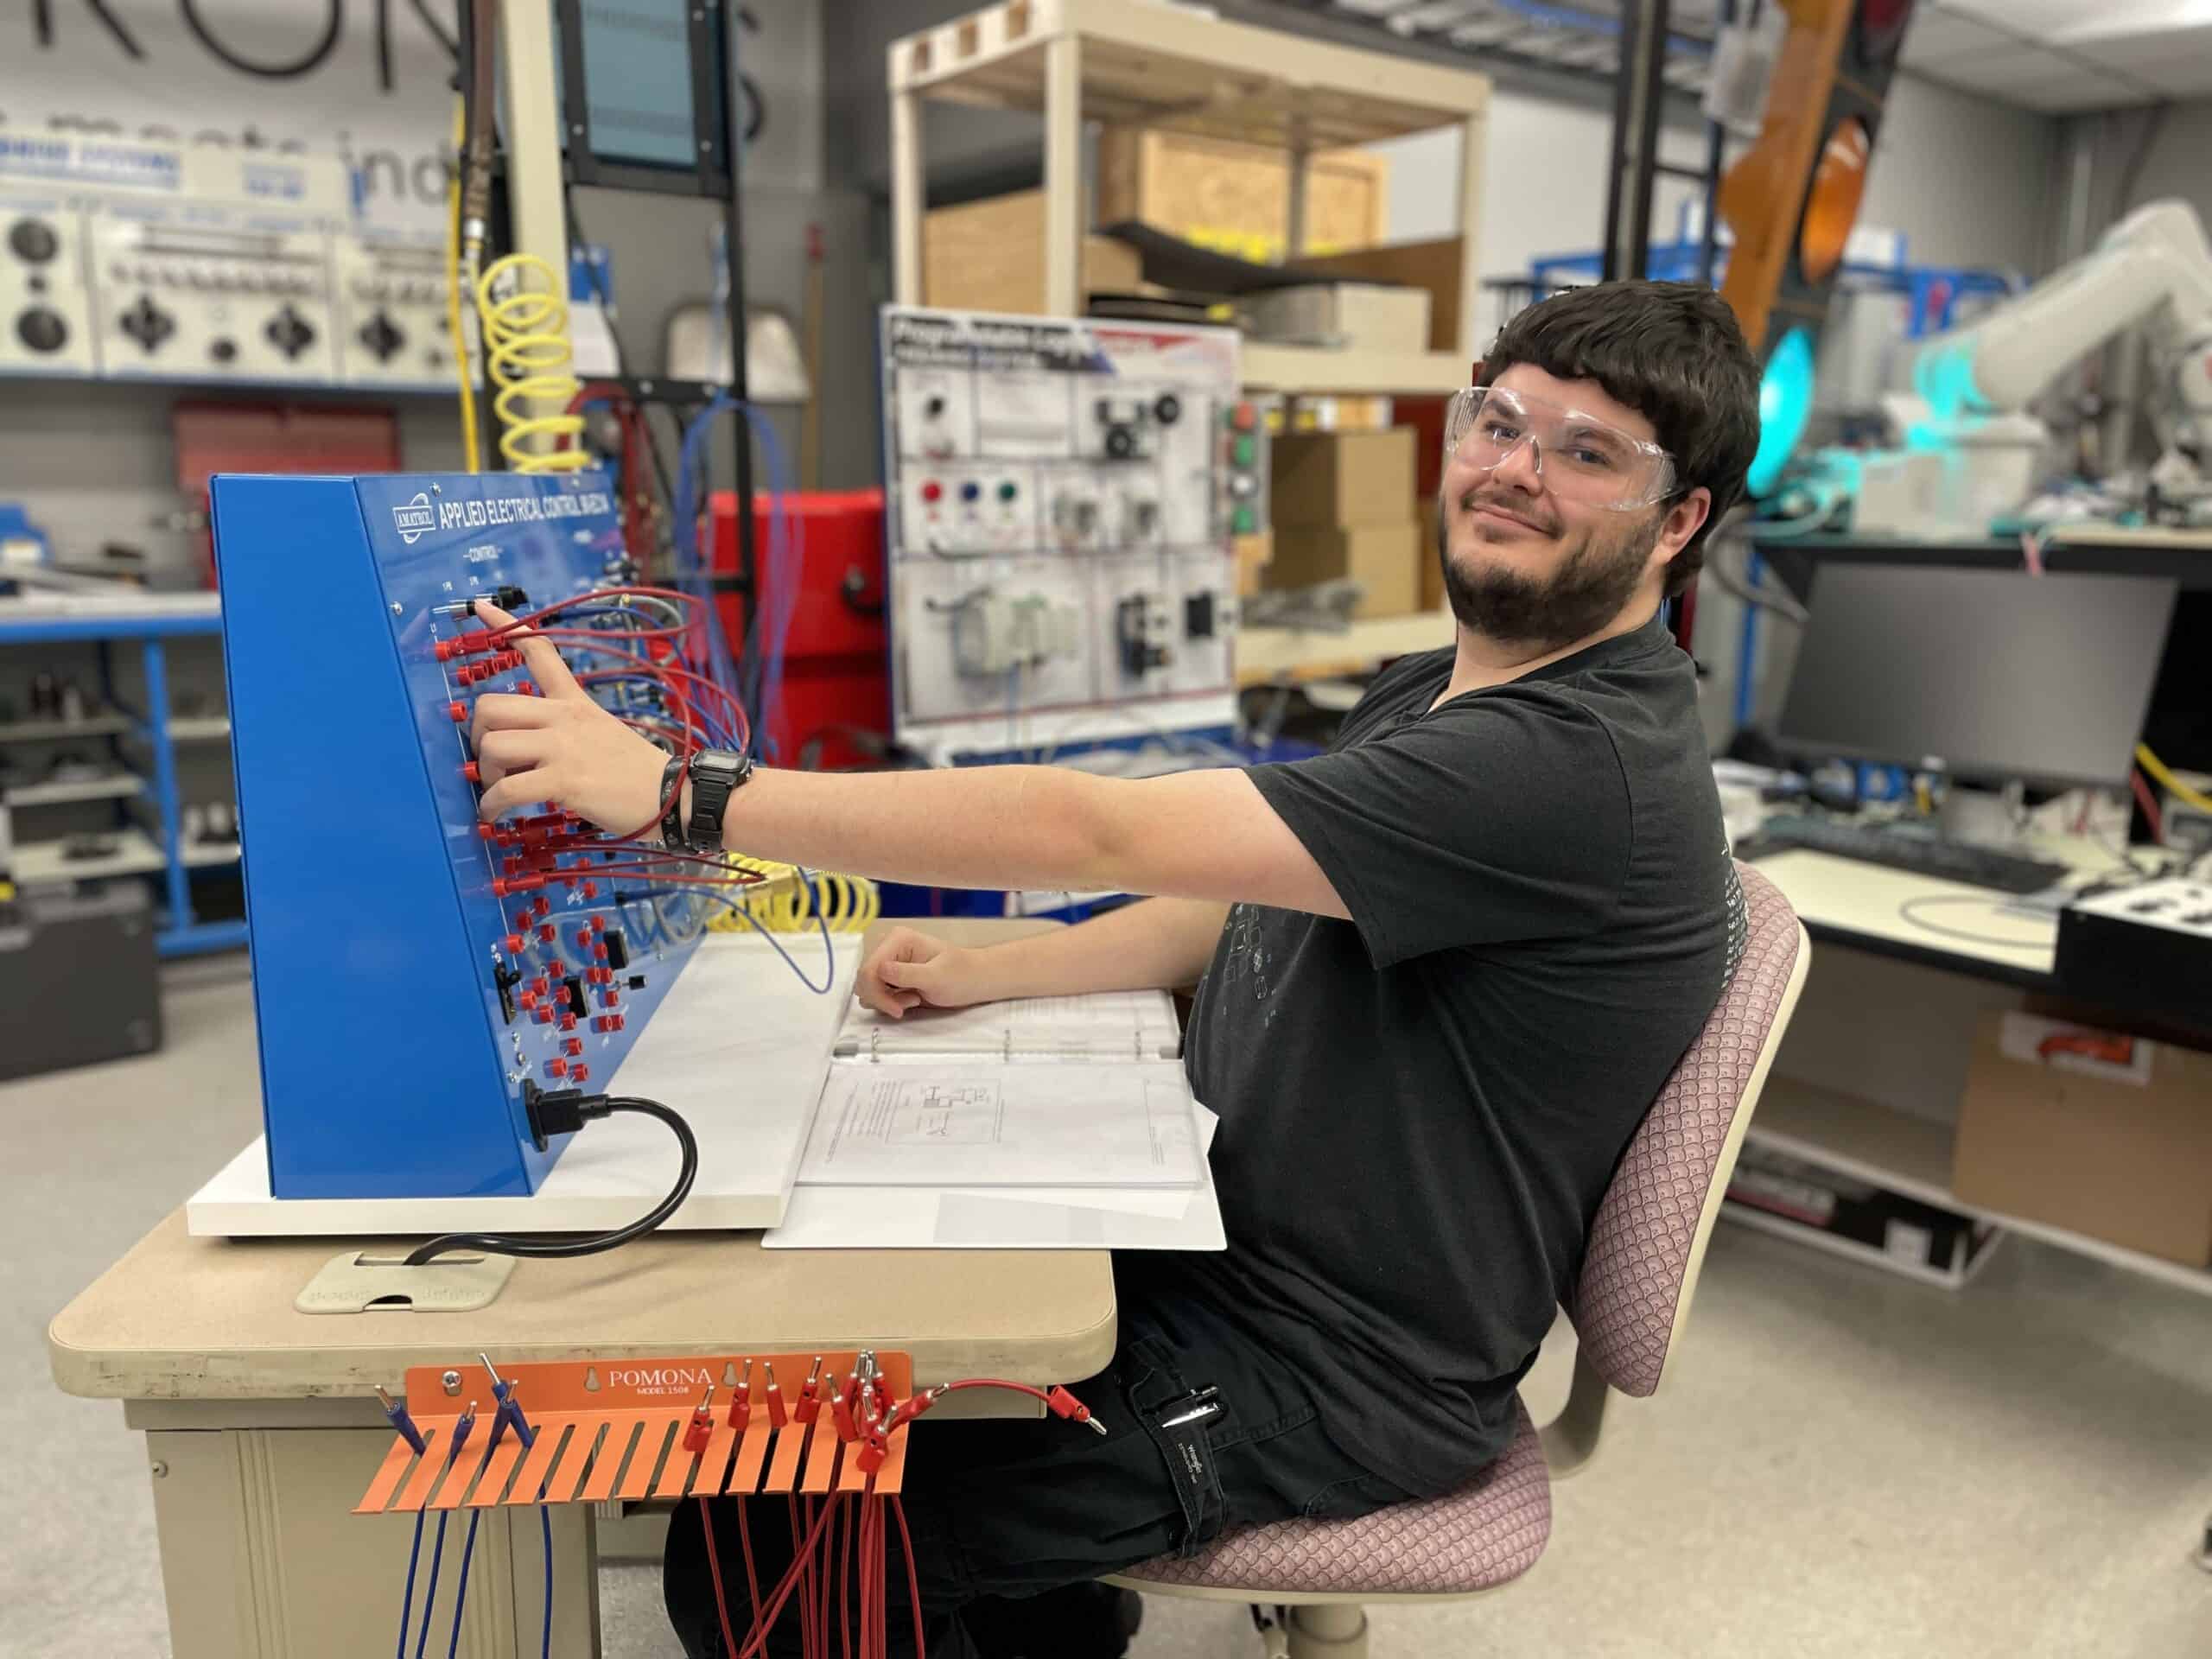 OFTC Mechatronics student James Scarborough in the lab